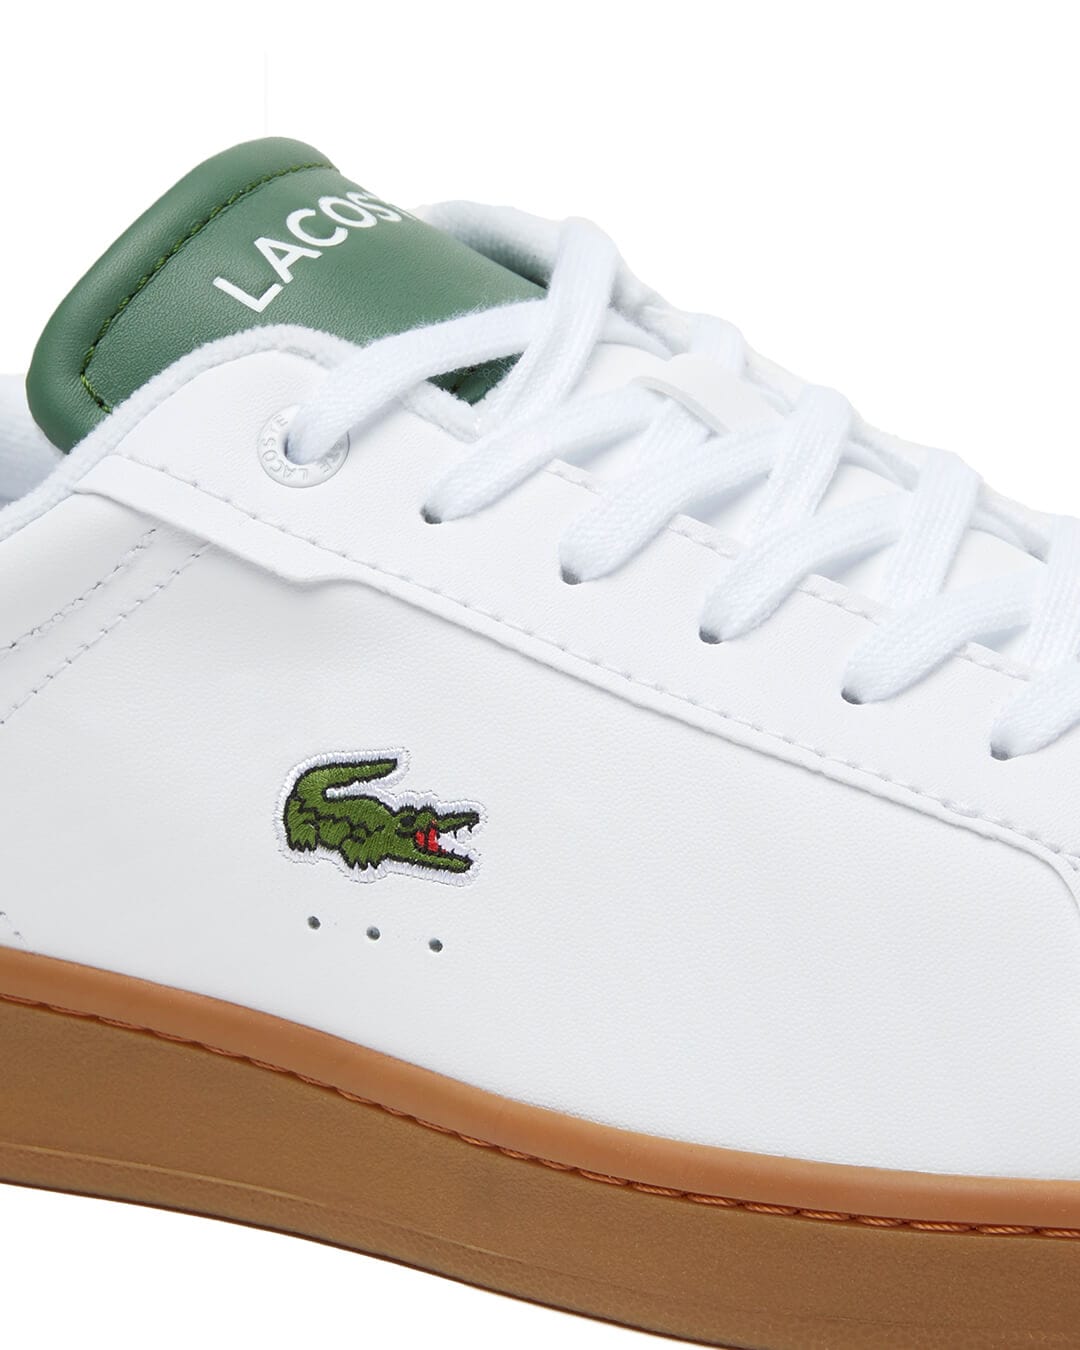 Lacoste Shoes Lacoste Carnaby Pro Leather Plain White Sneakers